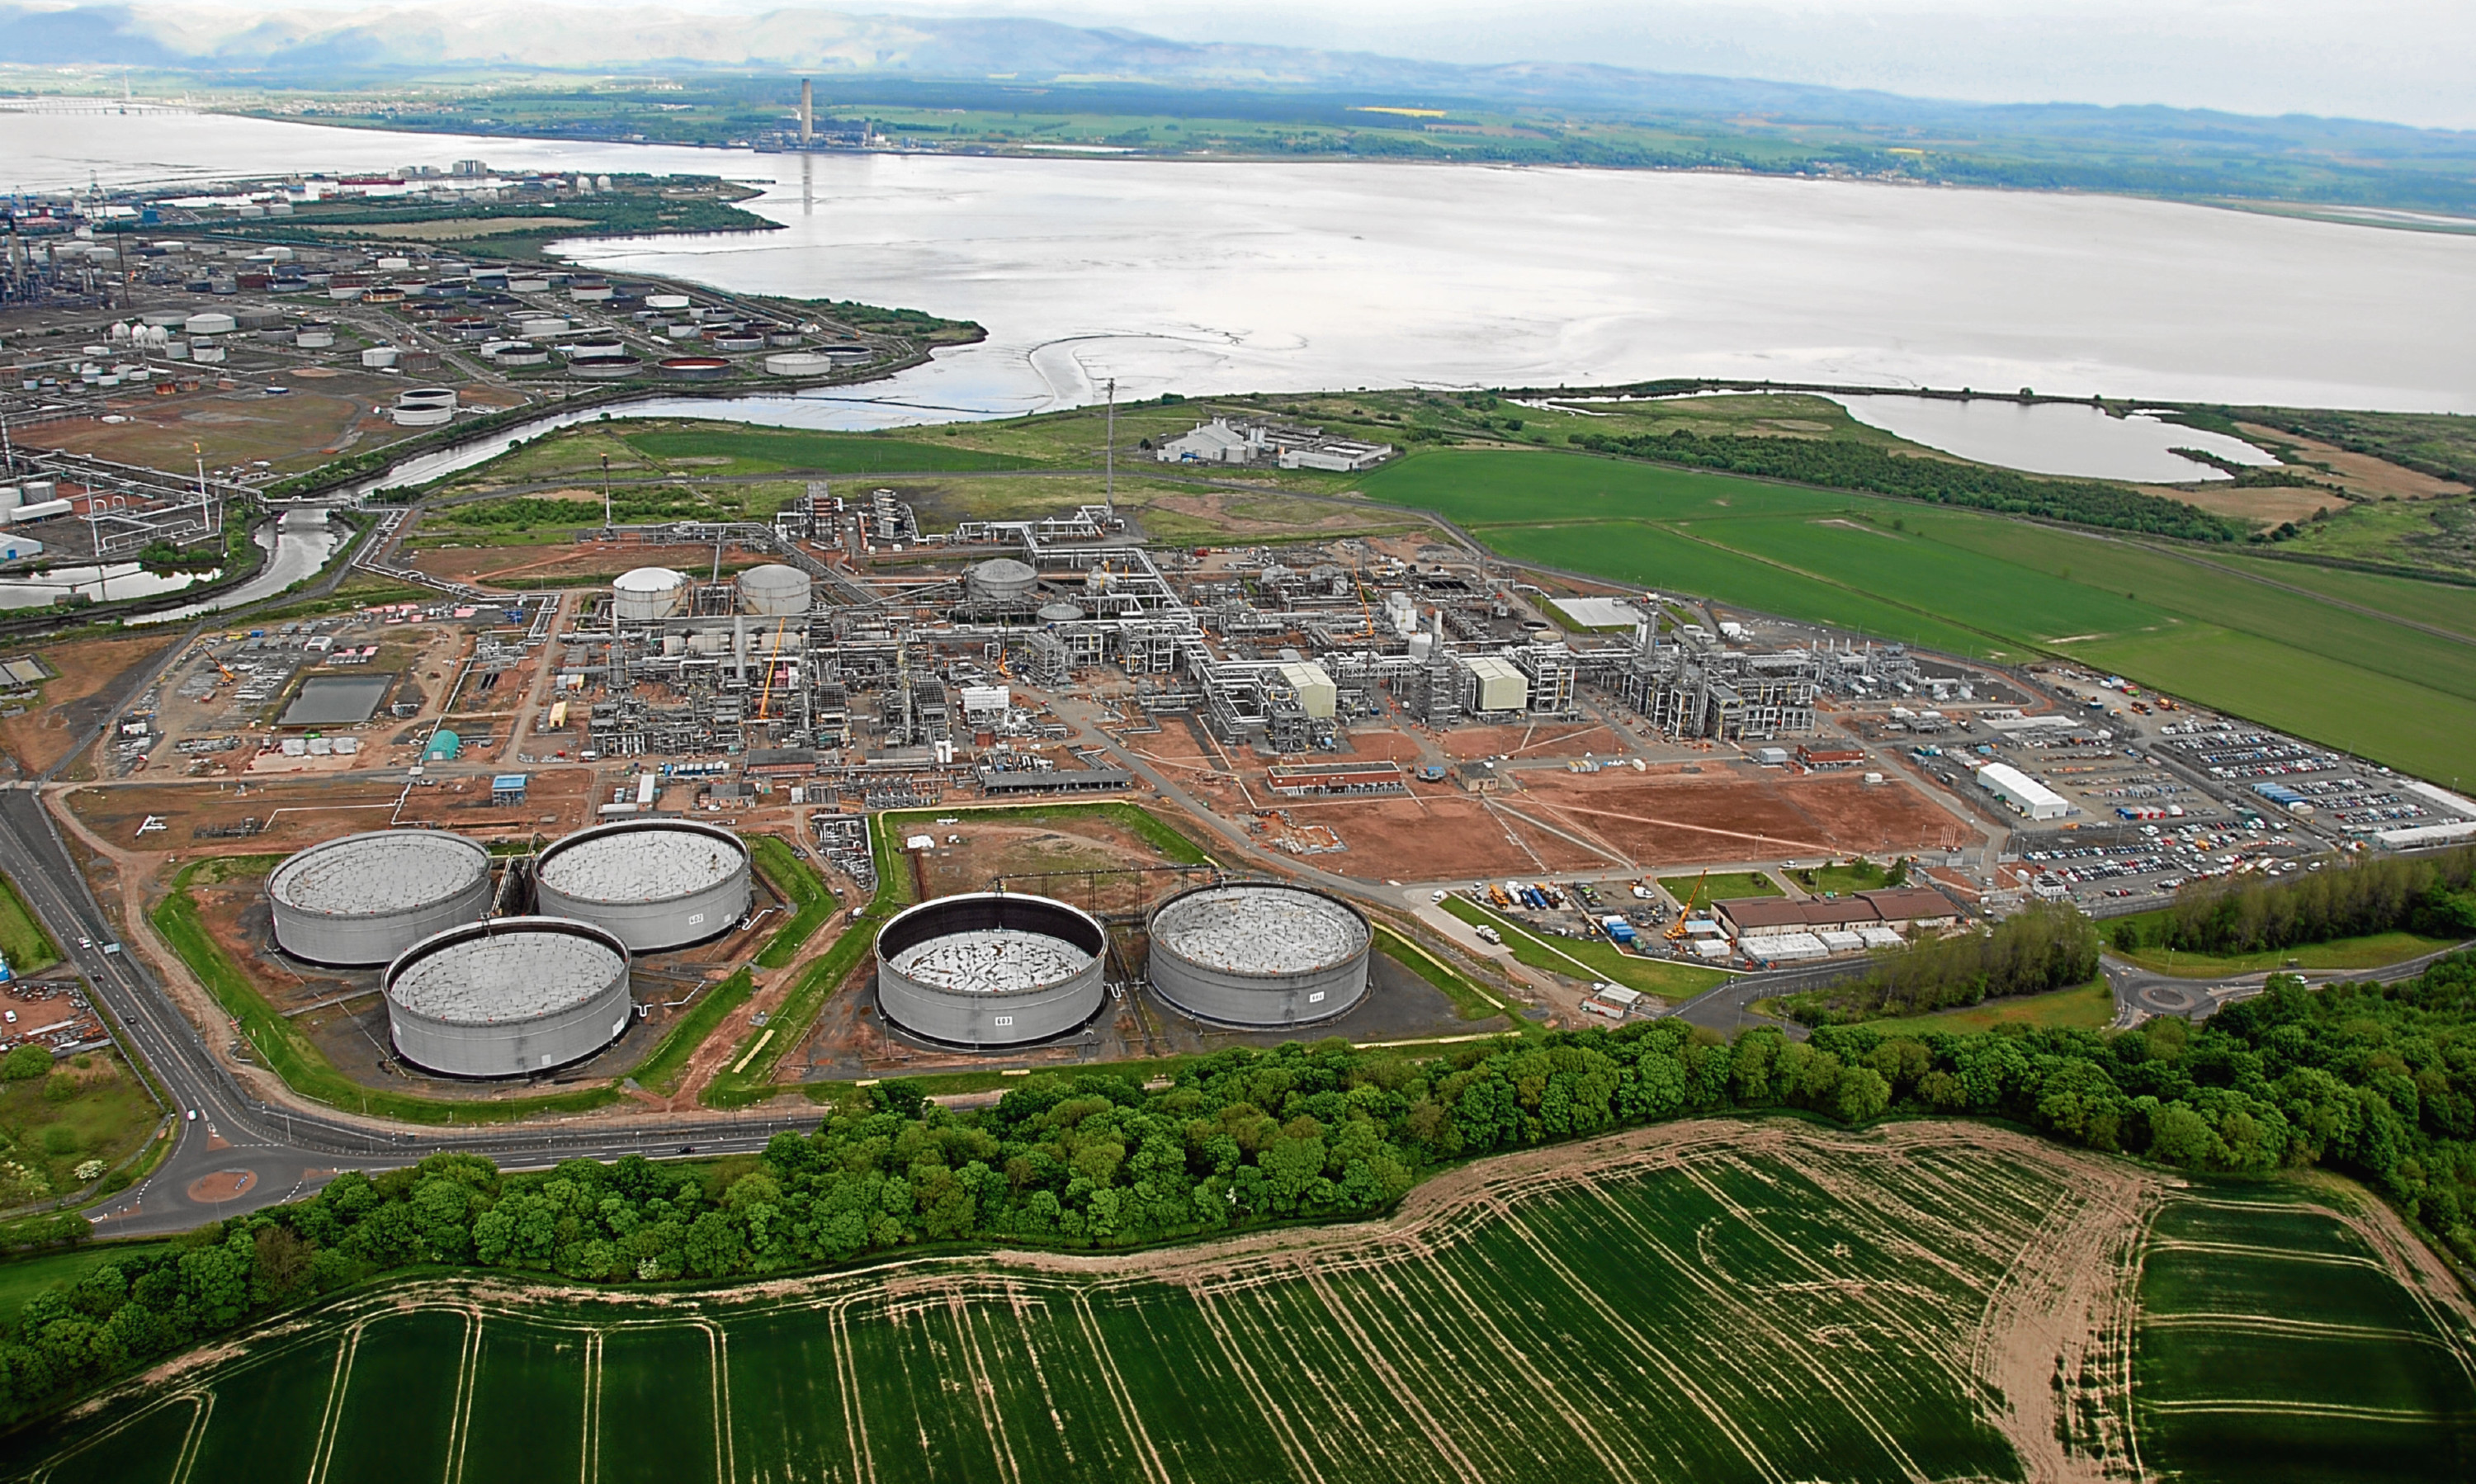 Bilfinger will provide support services to the Grangemouth terminal of the Forties pipeline